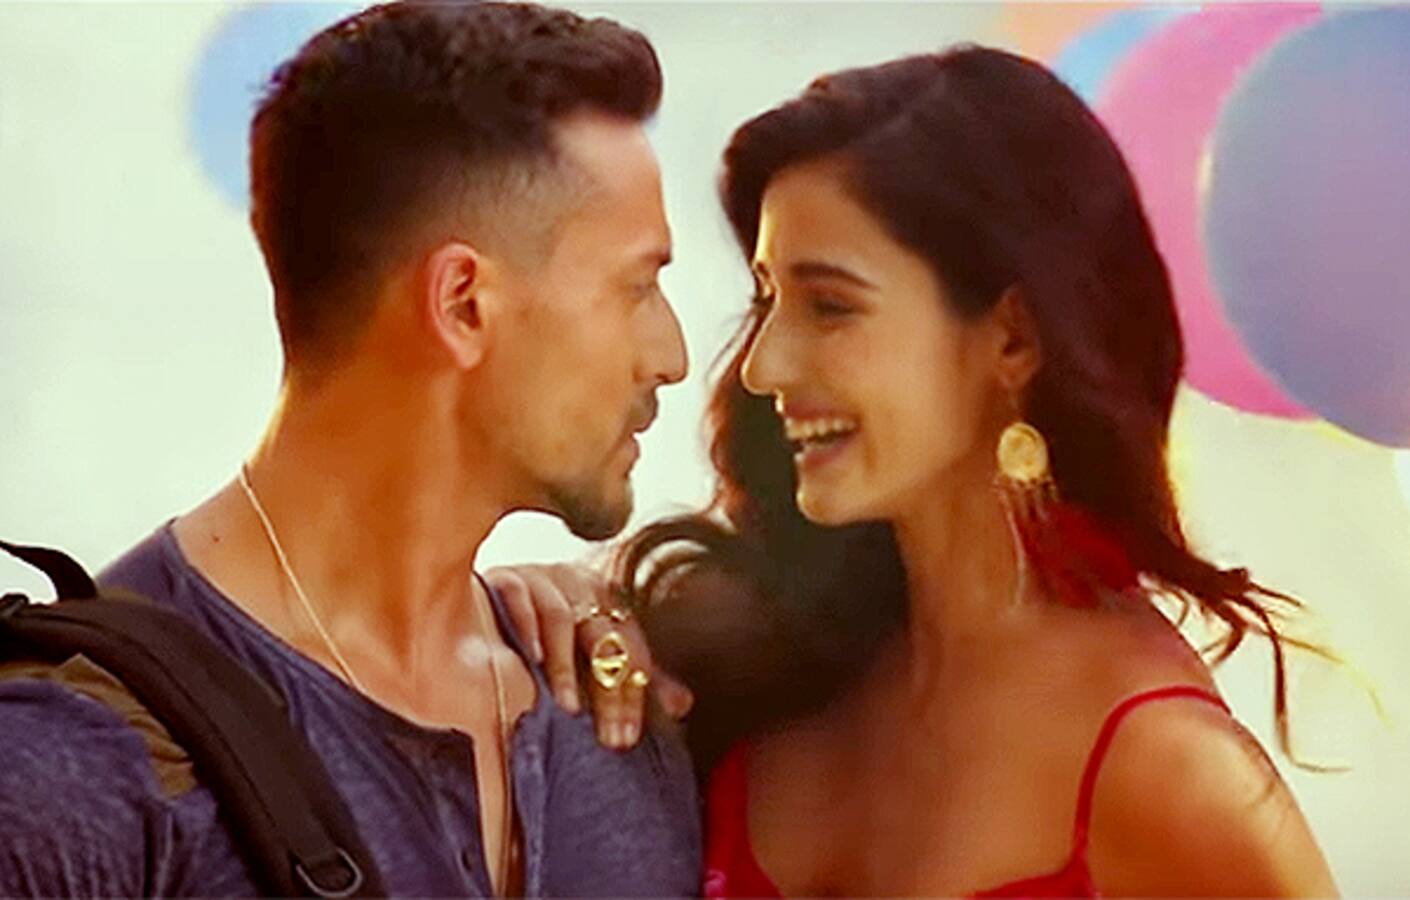 Baaghi 2 song Lo safar: Tiger Shroff seems to see Disha Patani everywhere  he looks - Bollywood News & Gossip, Movie Reviews, Trailers & Videos at  